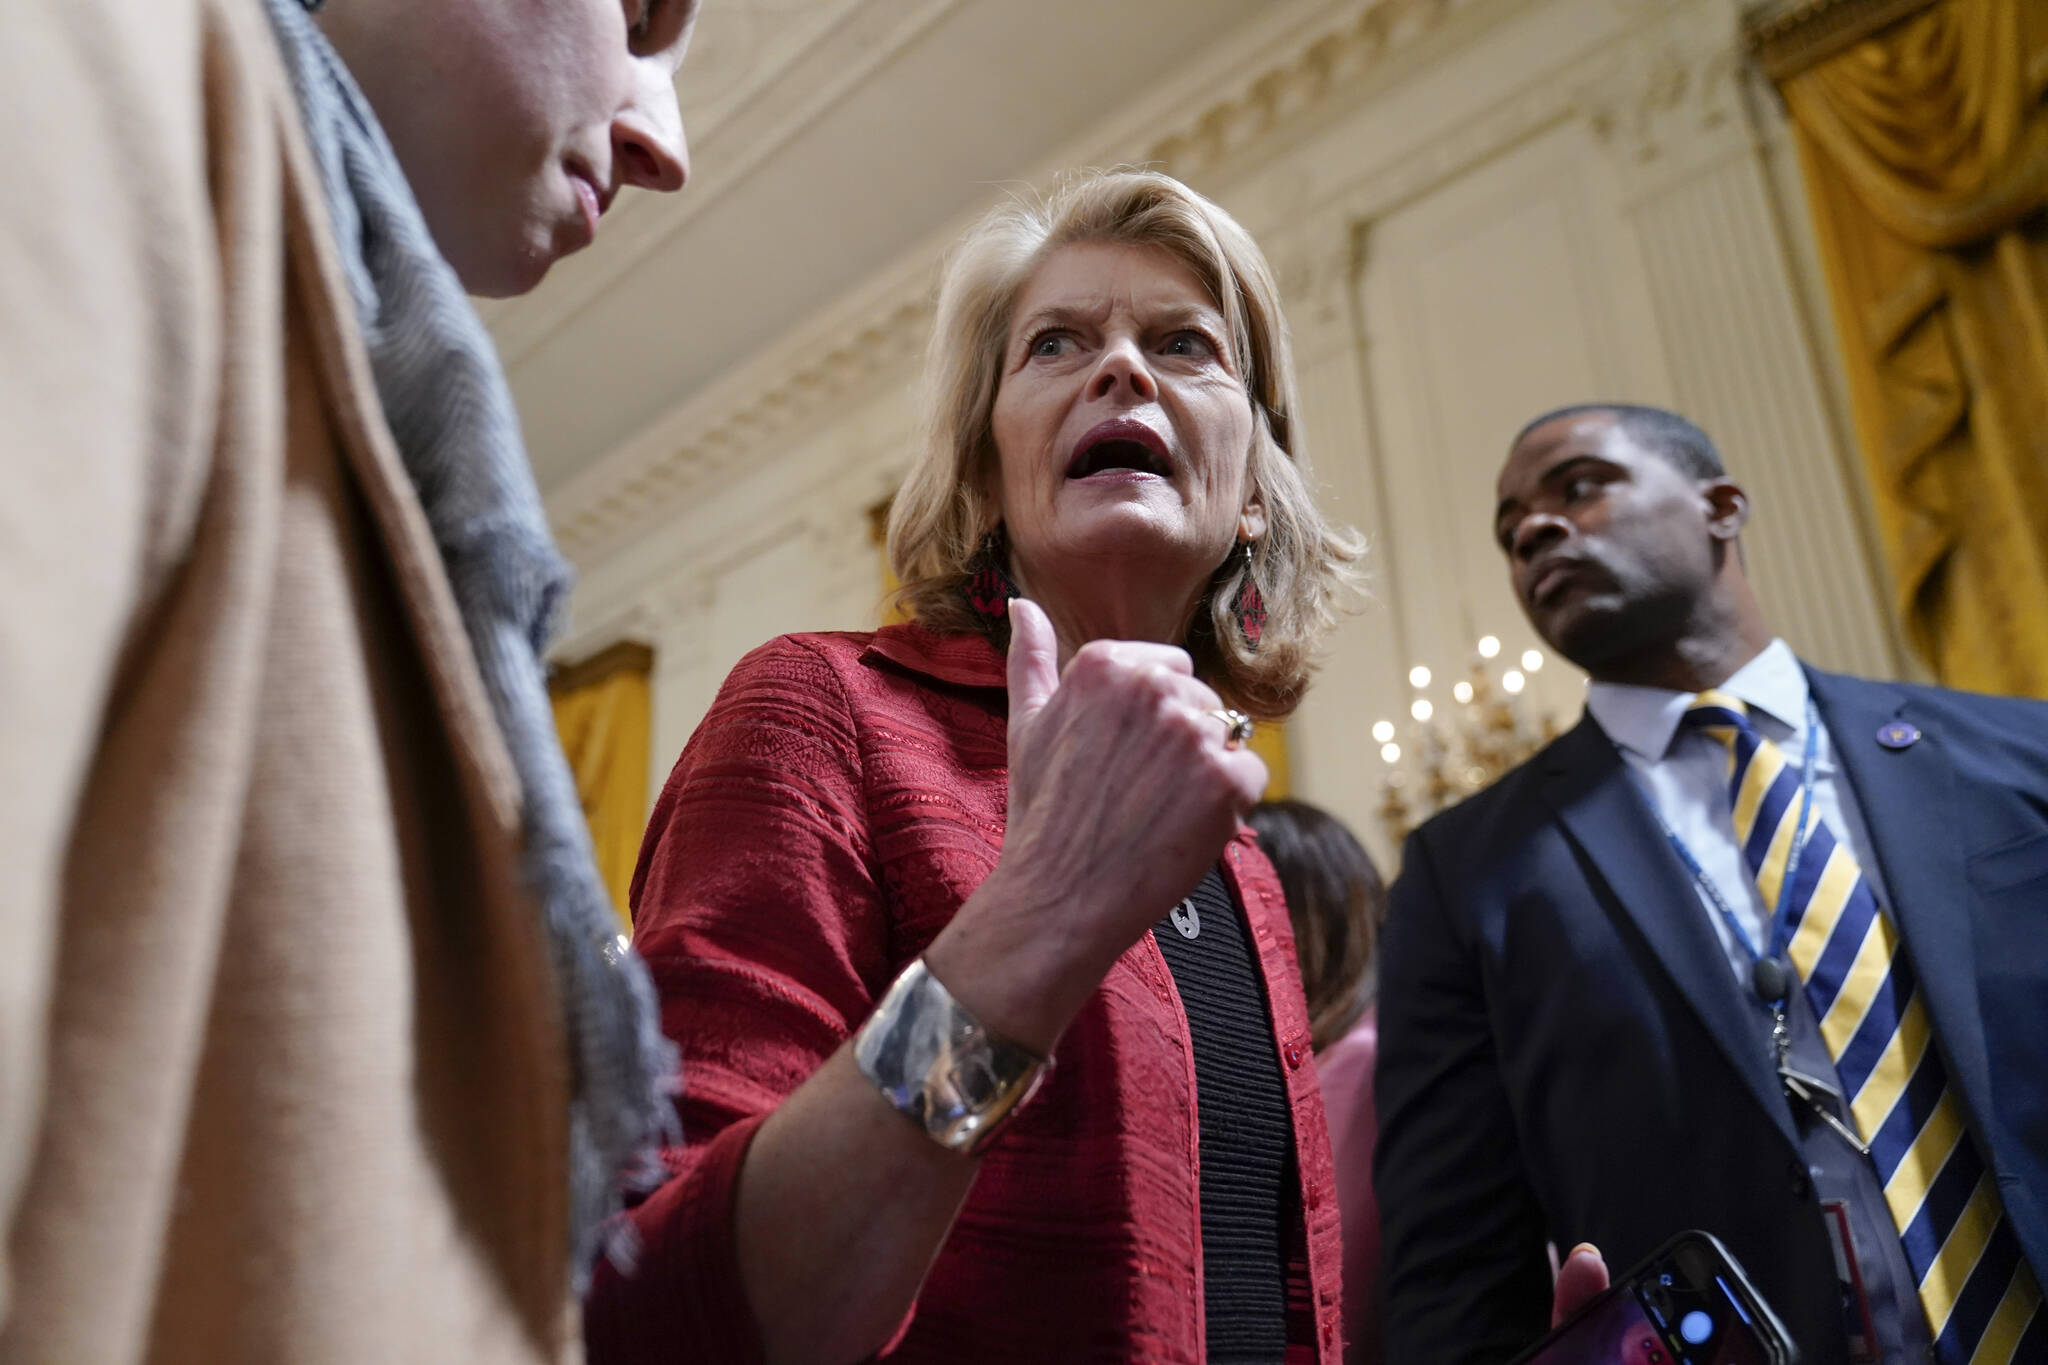 Sen. Lisa Murkowski, R-Alaska, talks with a reporter after attending at an event to celebrate the reauthorization of the Violence Against Women Act in the East Room of the White House, Wednesday, March 16, 2022, in Washington. Murkowski spoke the the Alaska House of Representatives Special Committee on Tribal Affairs Thursday about what the bill means for Alaska. (AP Photo/Patrick Semansky)